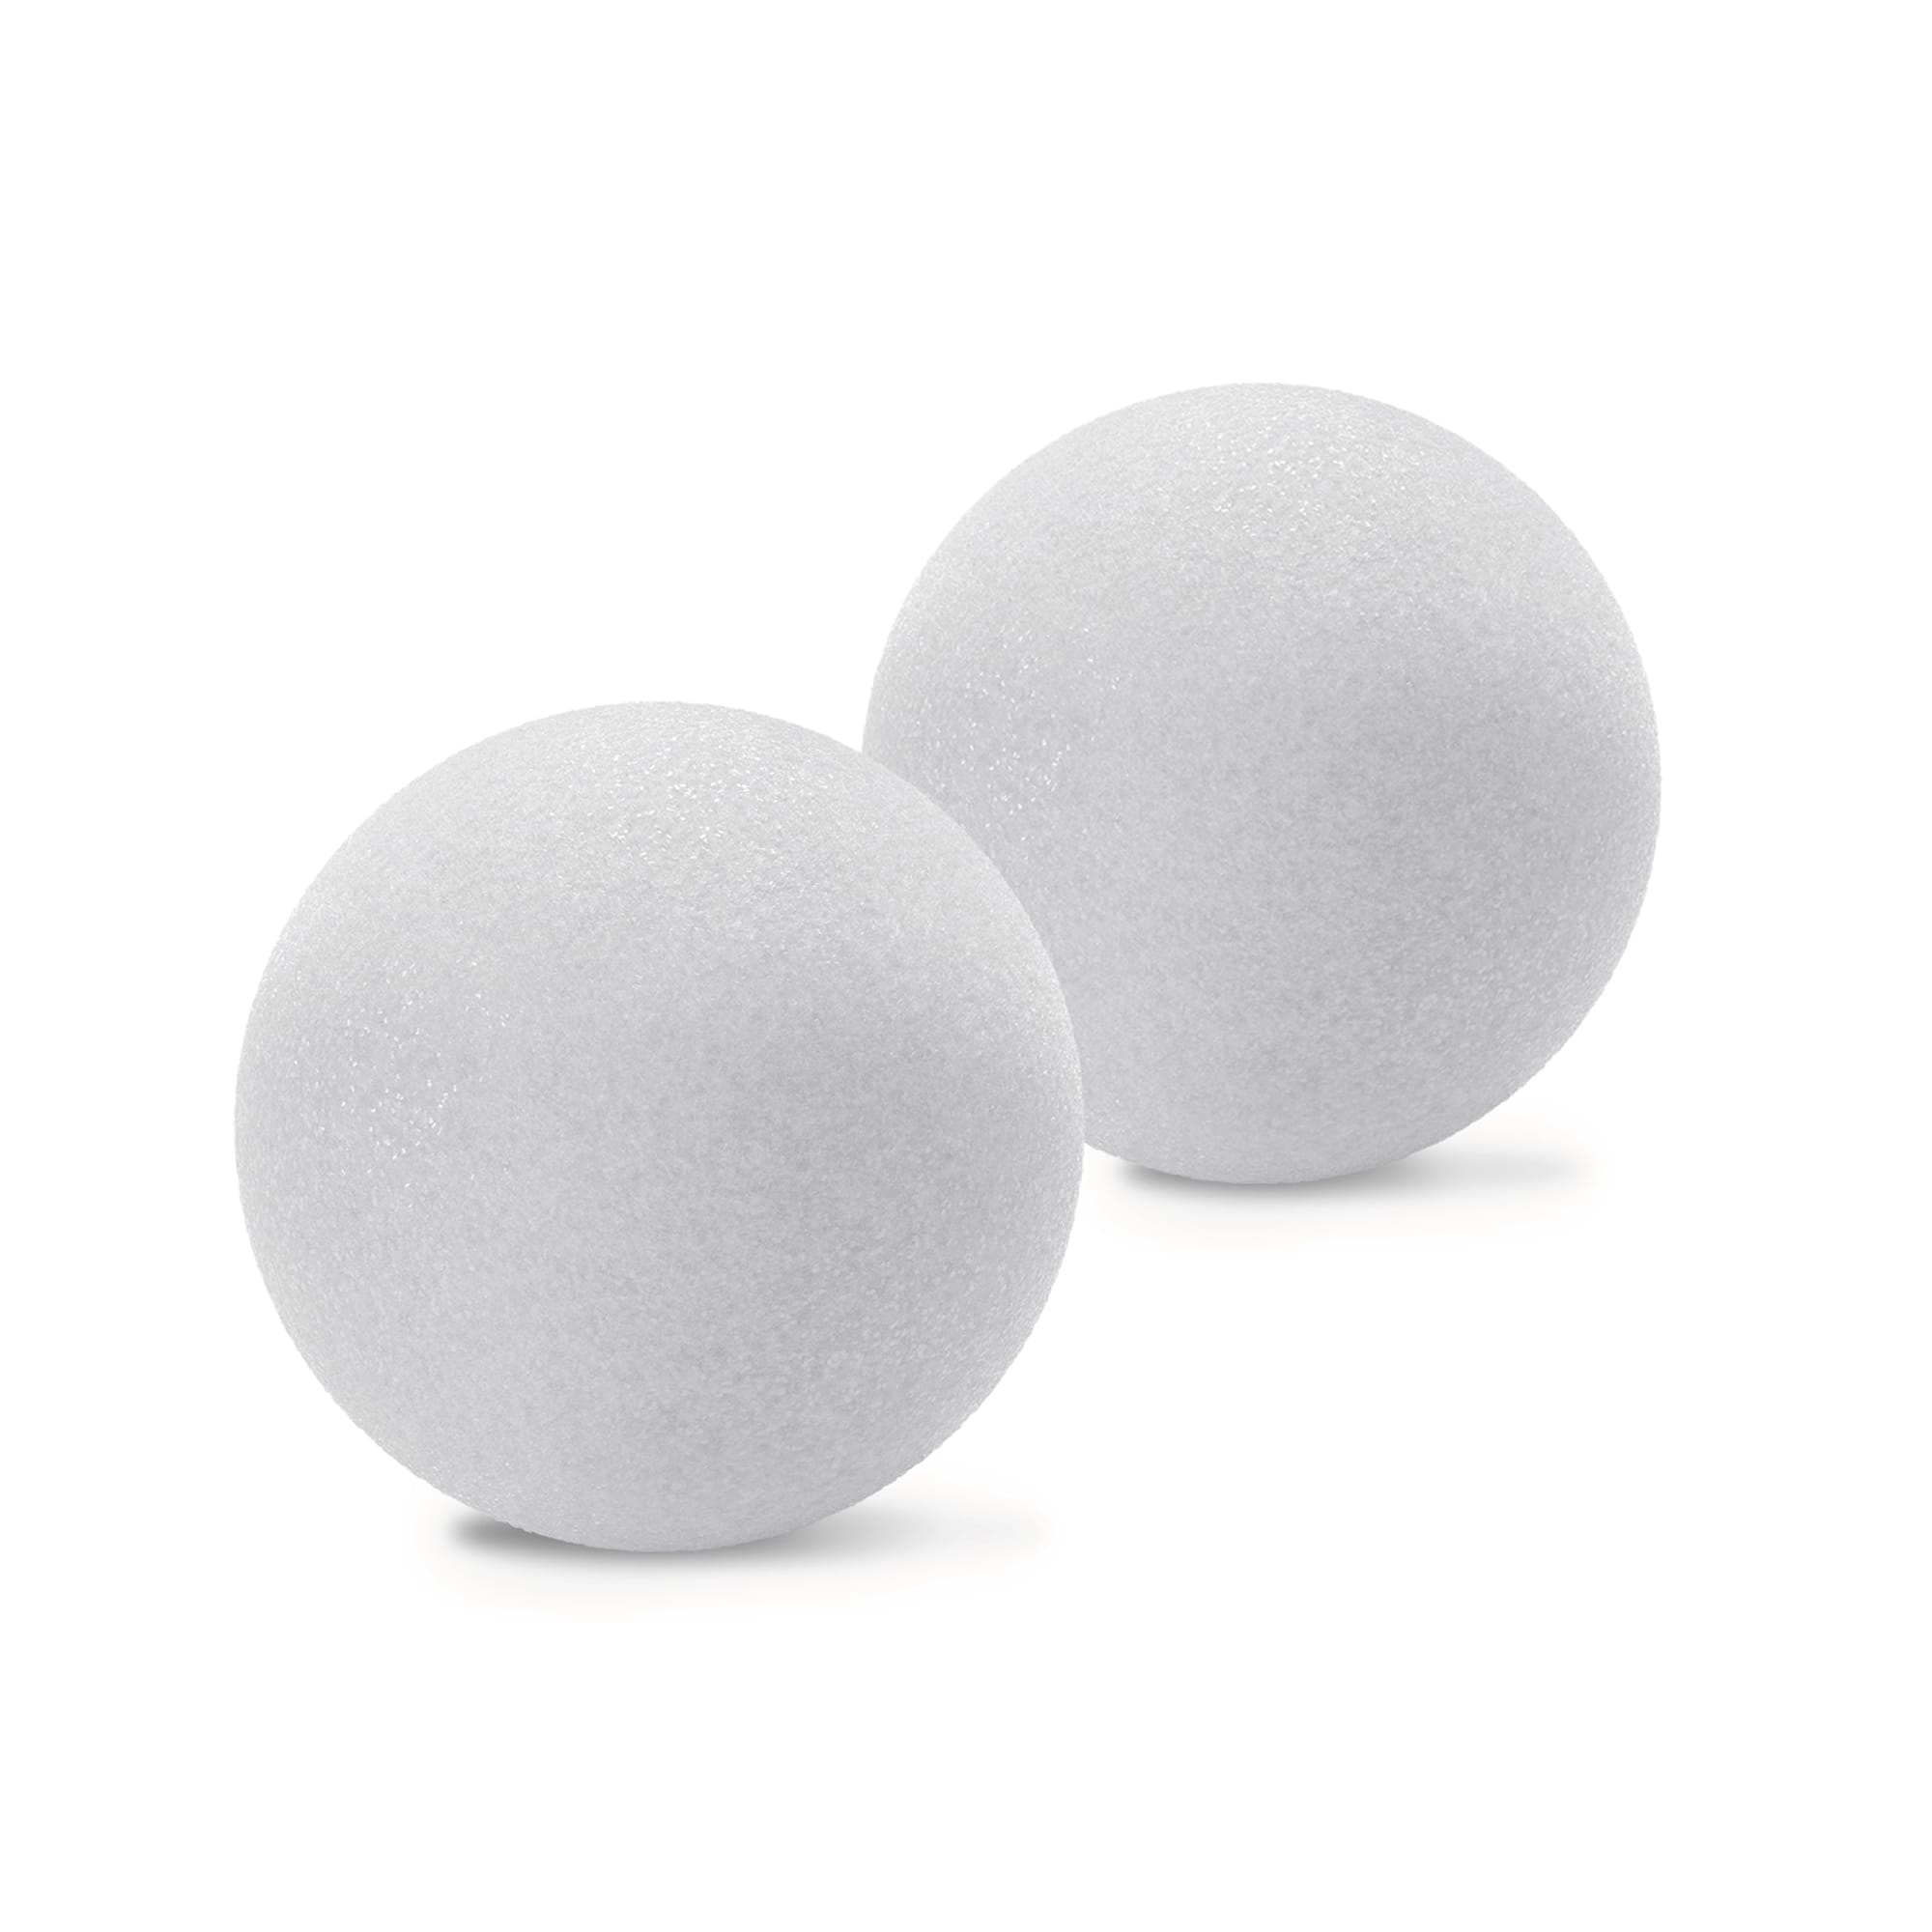  Juvale 24 Pack 3 Inch Foam Balls for Crafts, Smooth Polystyrene  Spheres for DIY Decorations, Classroom Projects : Arts, Crafts & Sewing